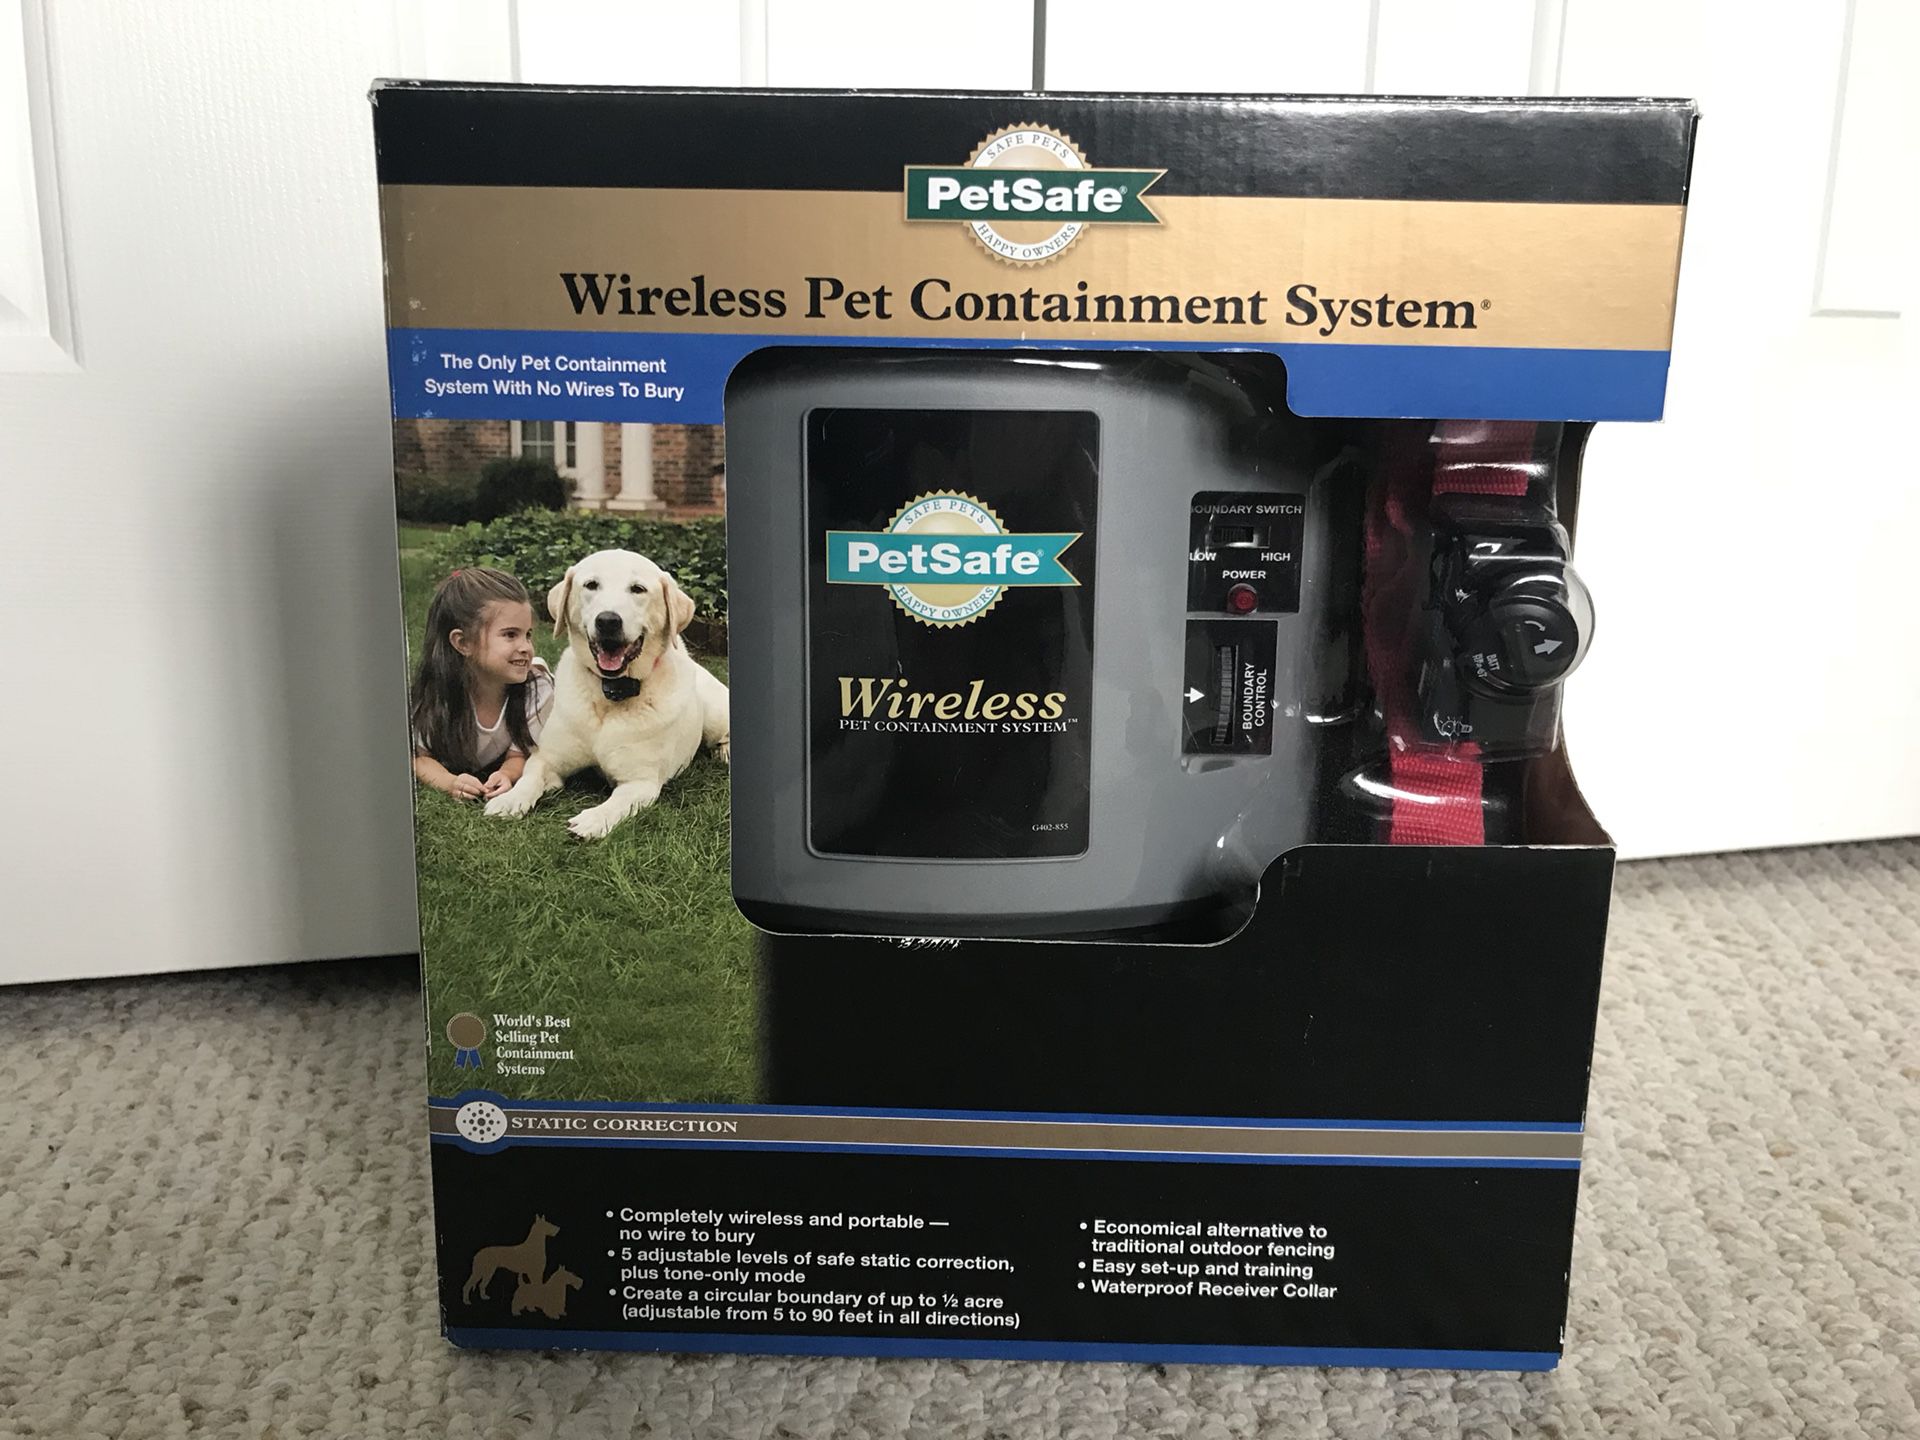 PetSafe Wireless Pet Containment System (PIF-300)